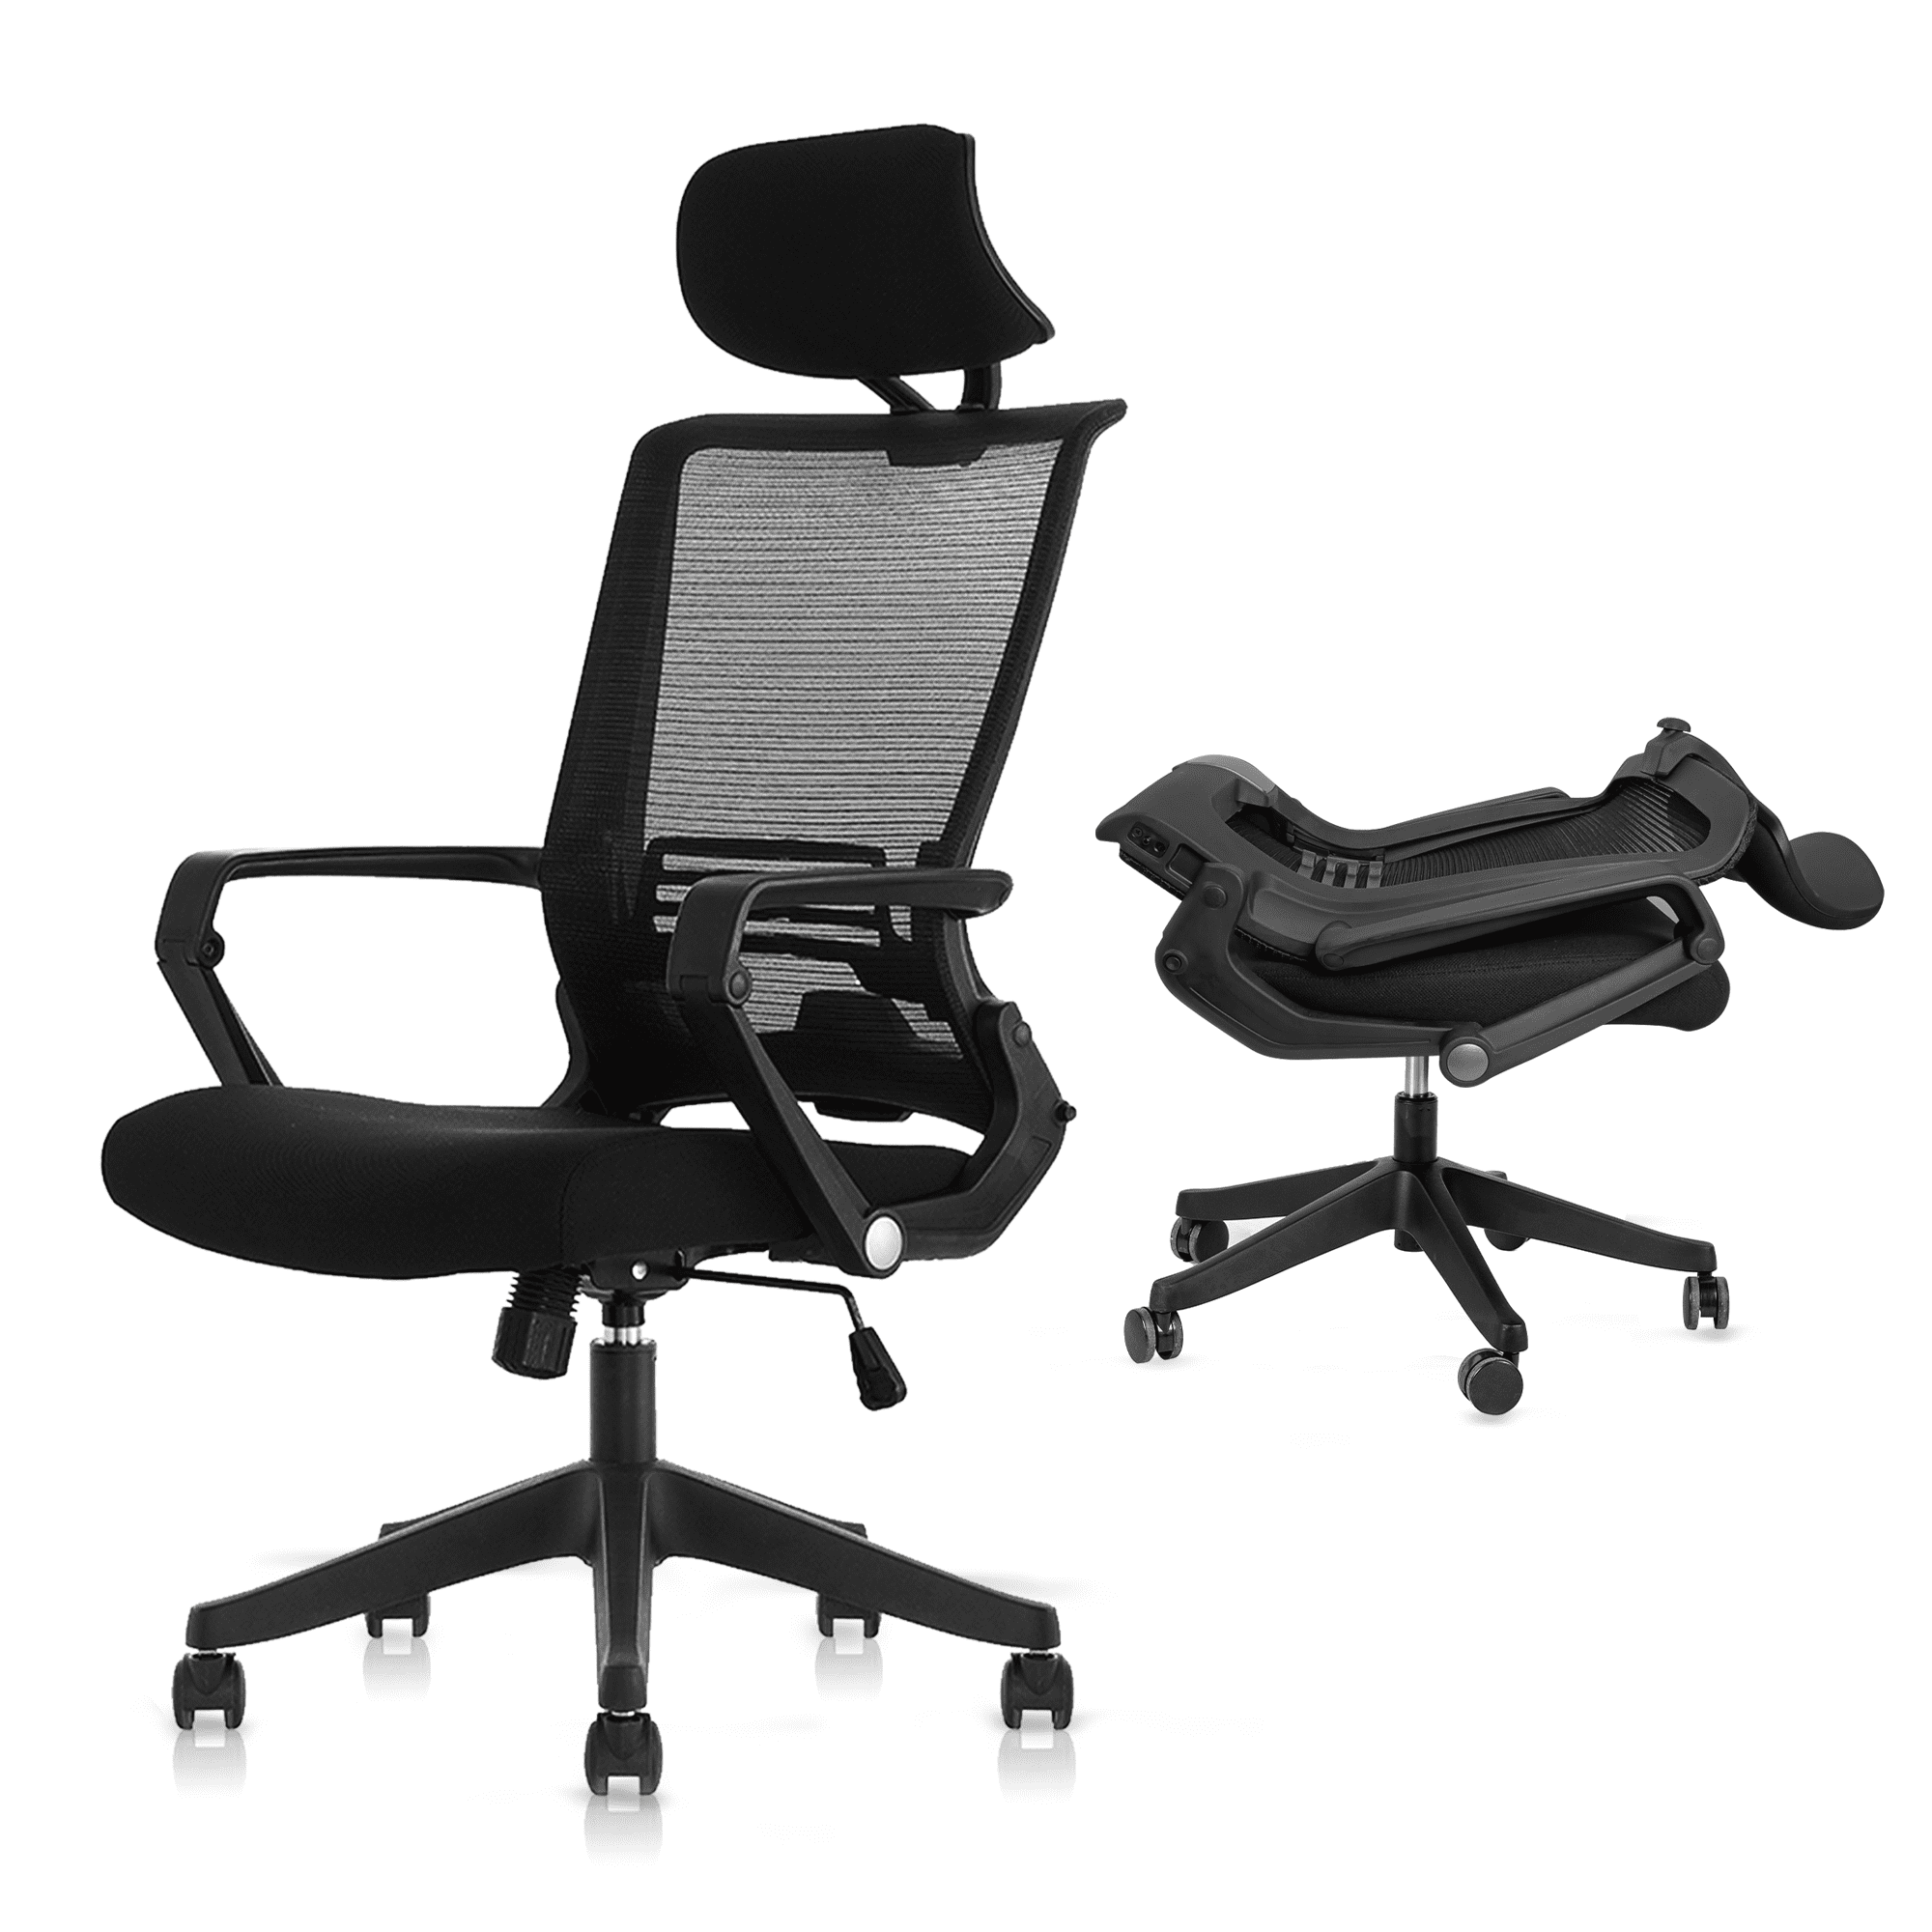 Dropship Office Chair Breathable Mesh, Computer Chair Lumbar Support,  Modern Simple Adjustable Chair Height With Fixed Armrests, Suitable For  Home Or Office (Black) to Sell Online at a Lower Price